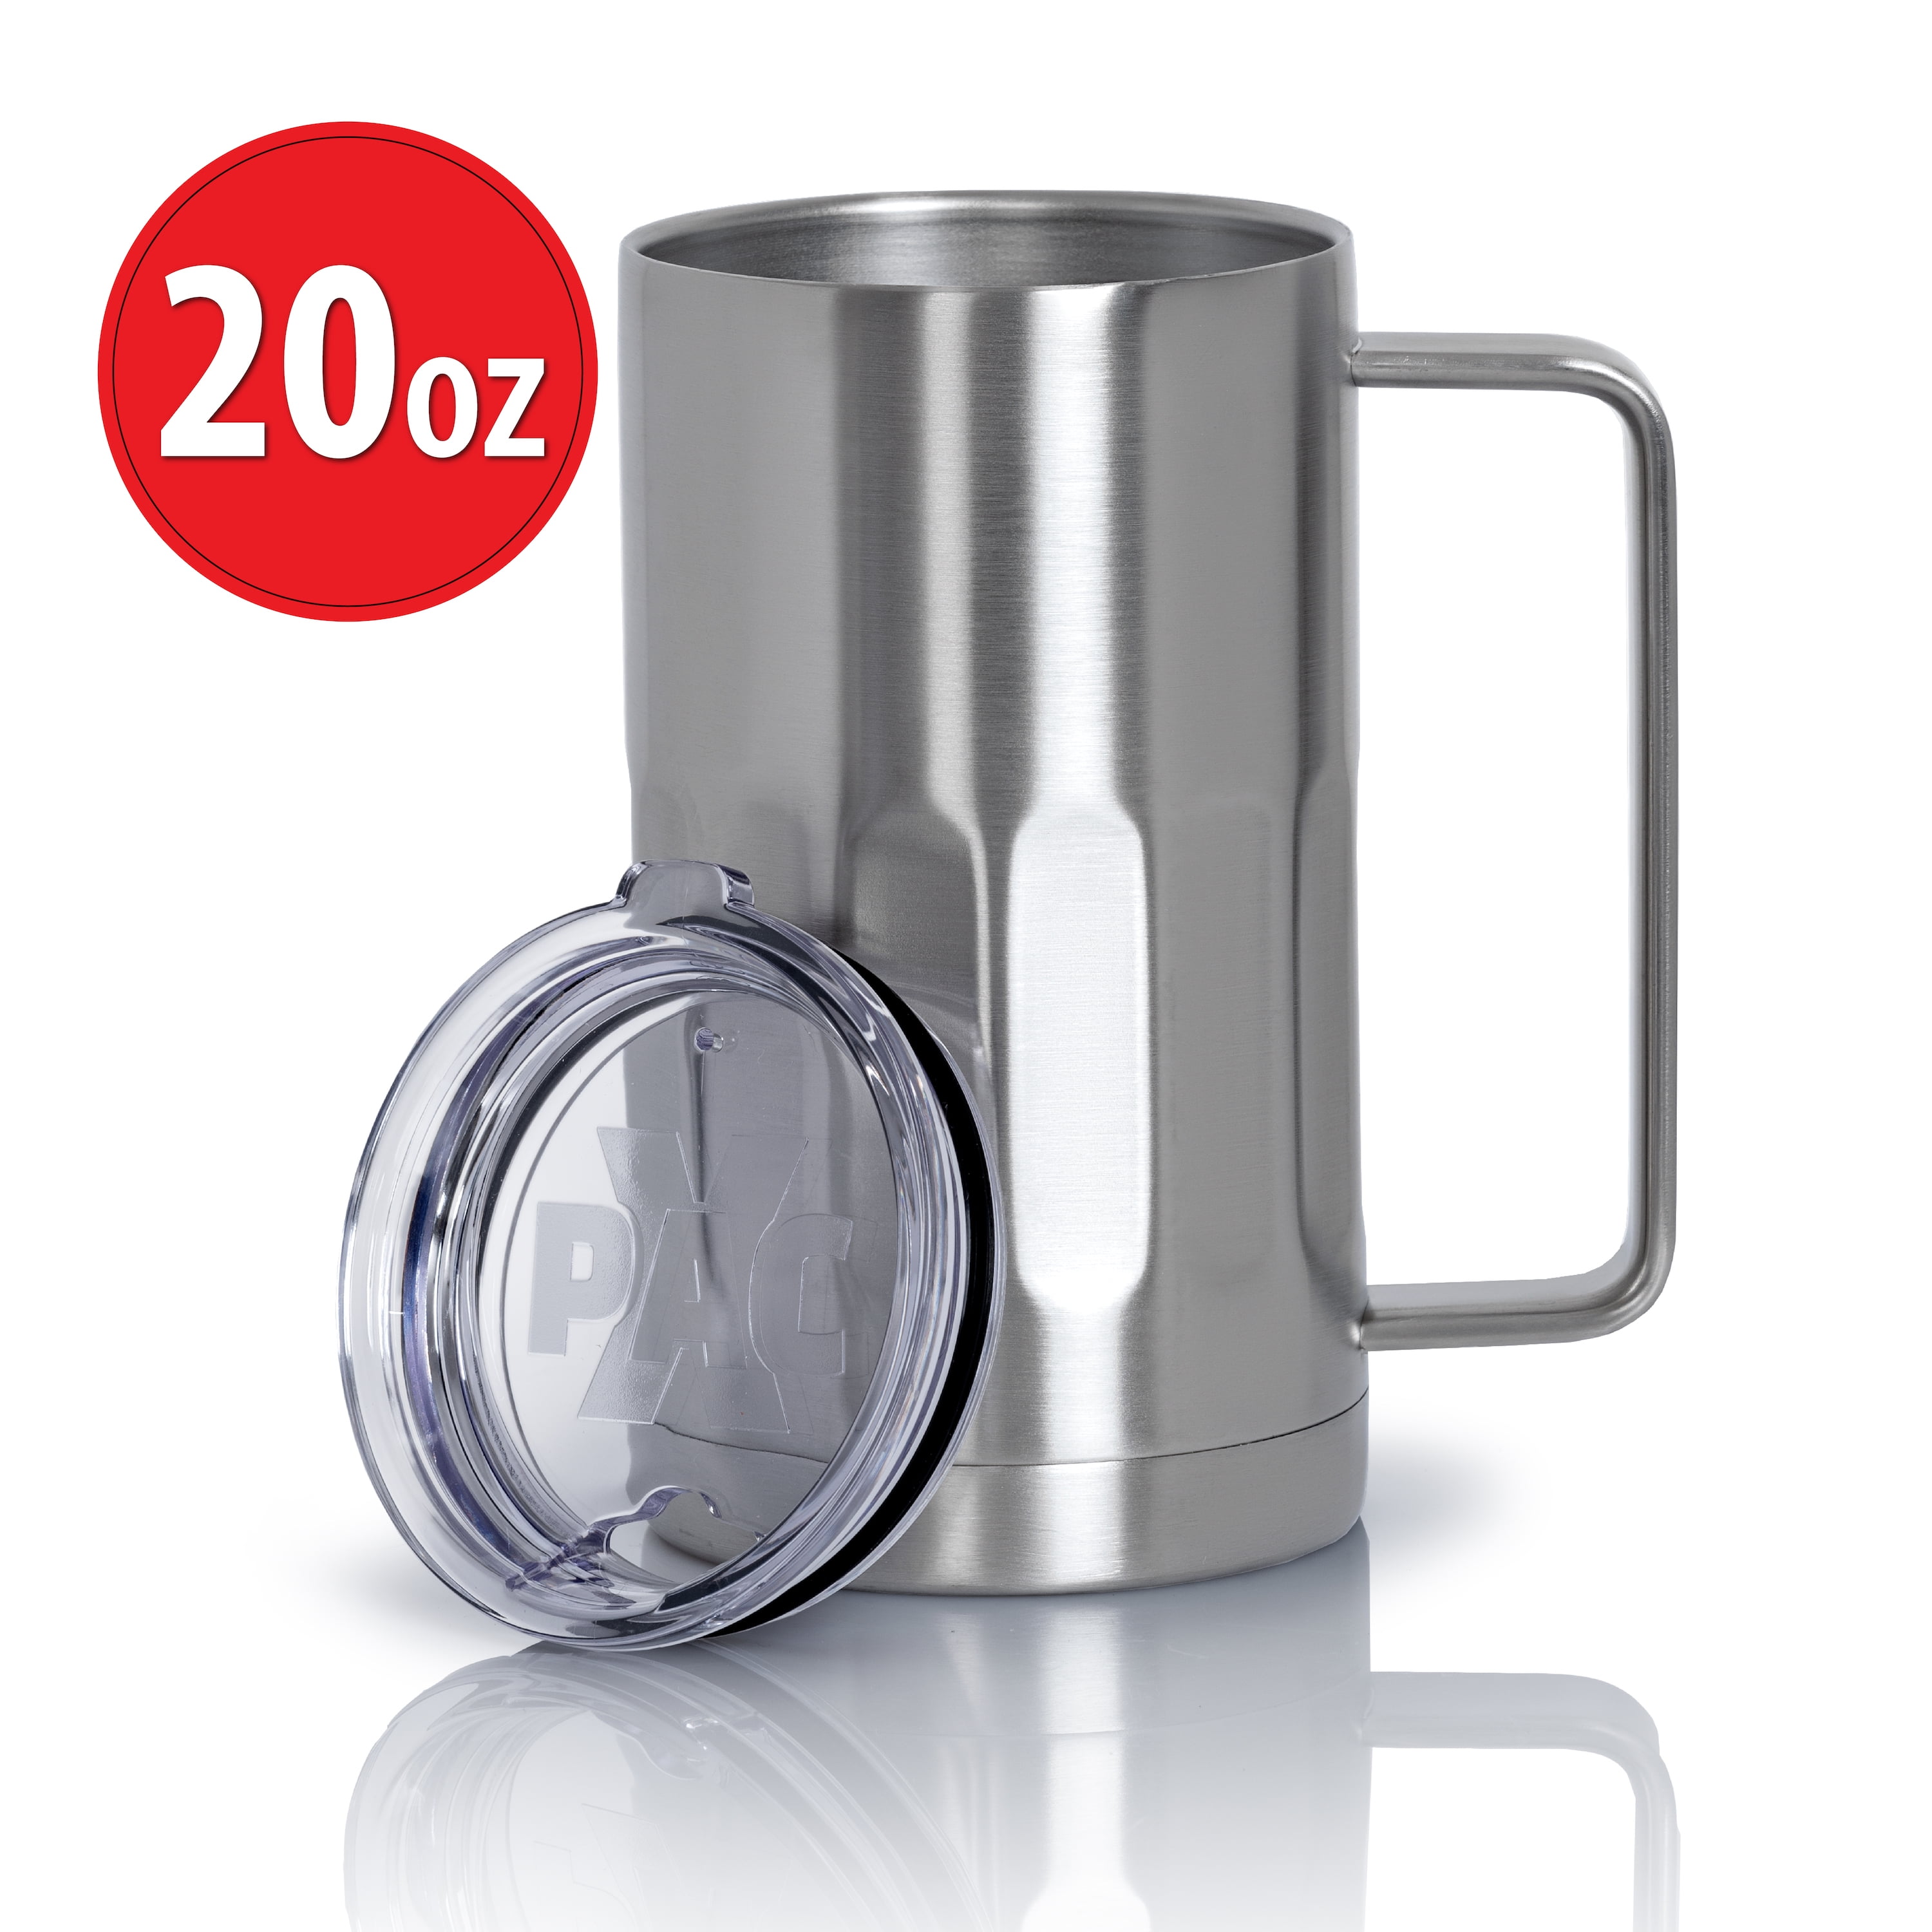 Maxam High-Quality Stainless Steel Hot and Cold Thermos Lunch ~ Meal Set 